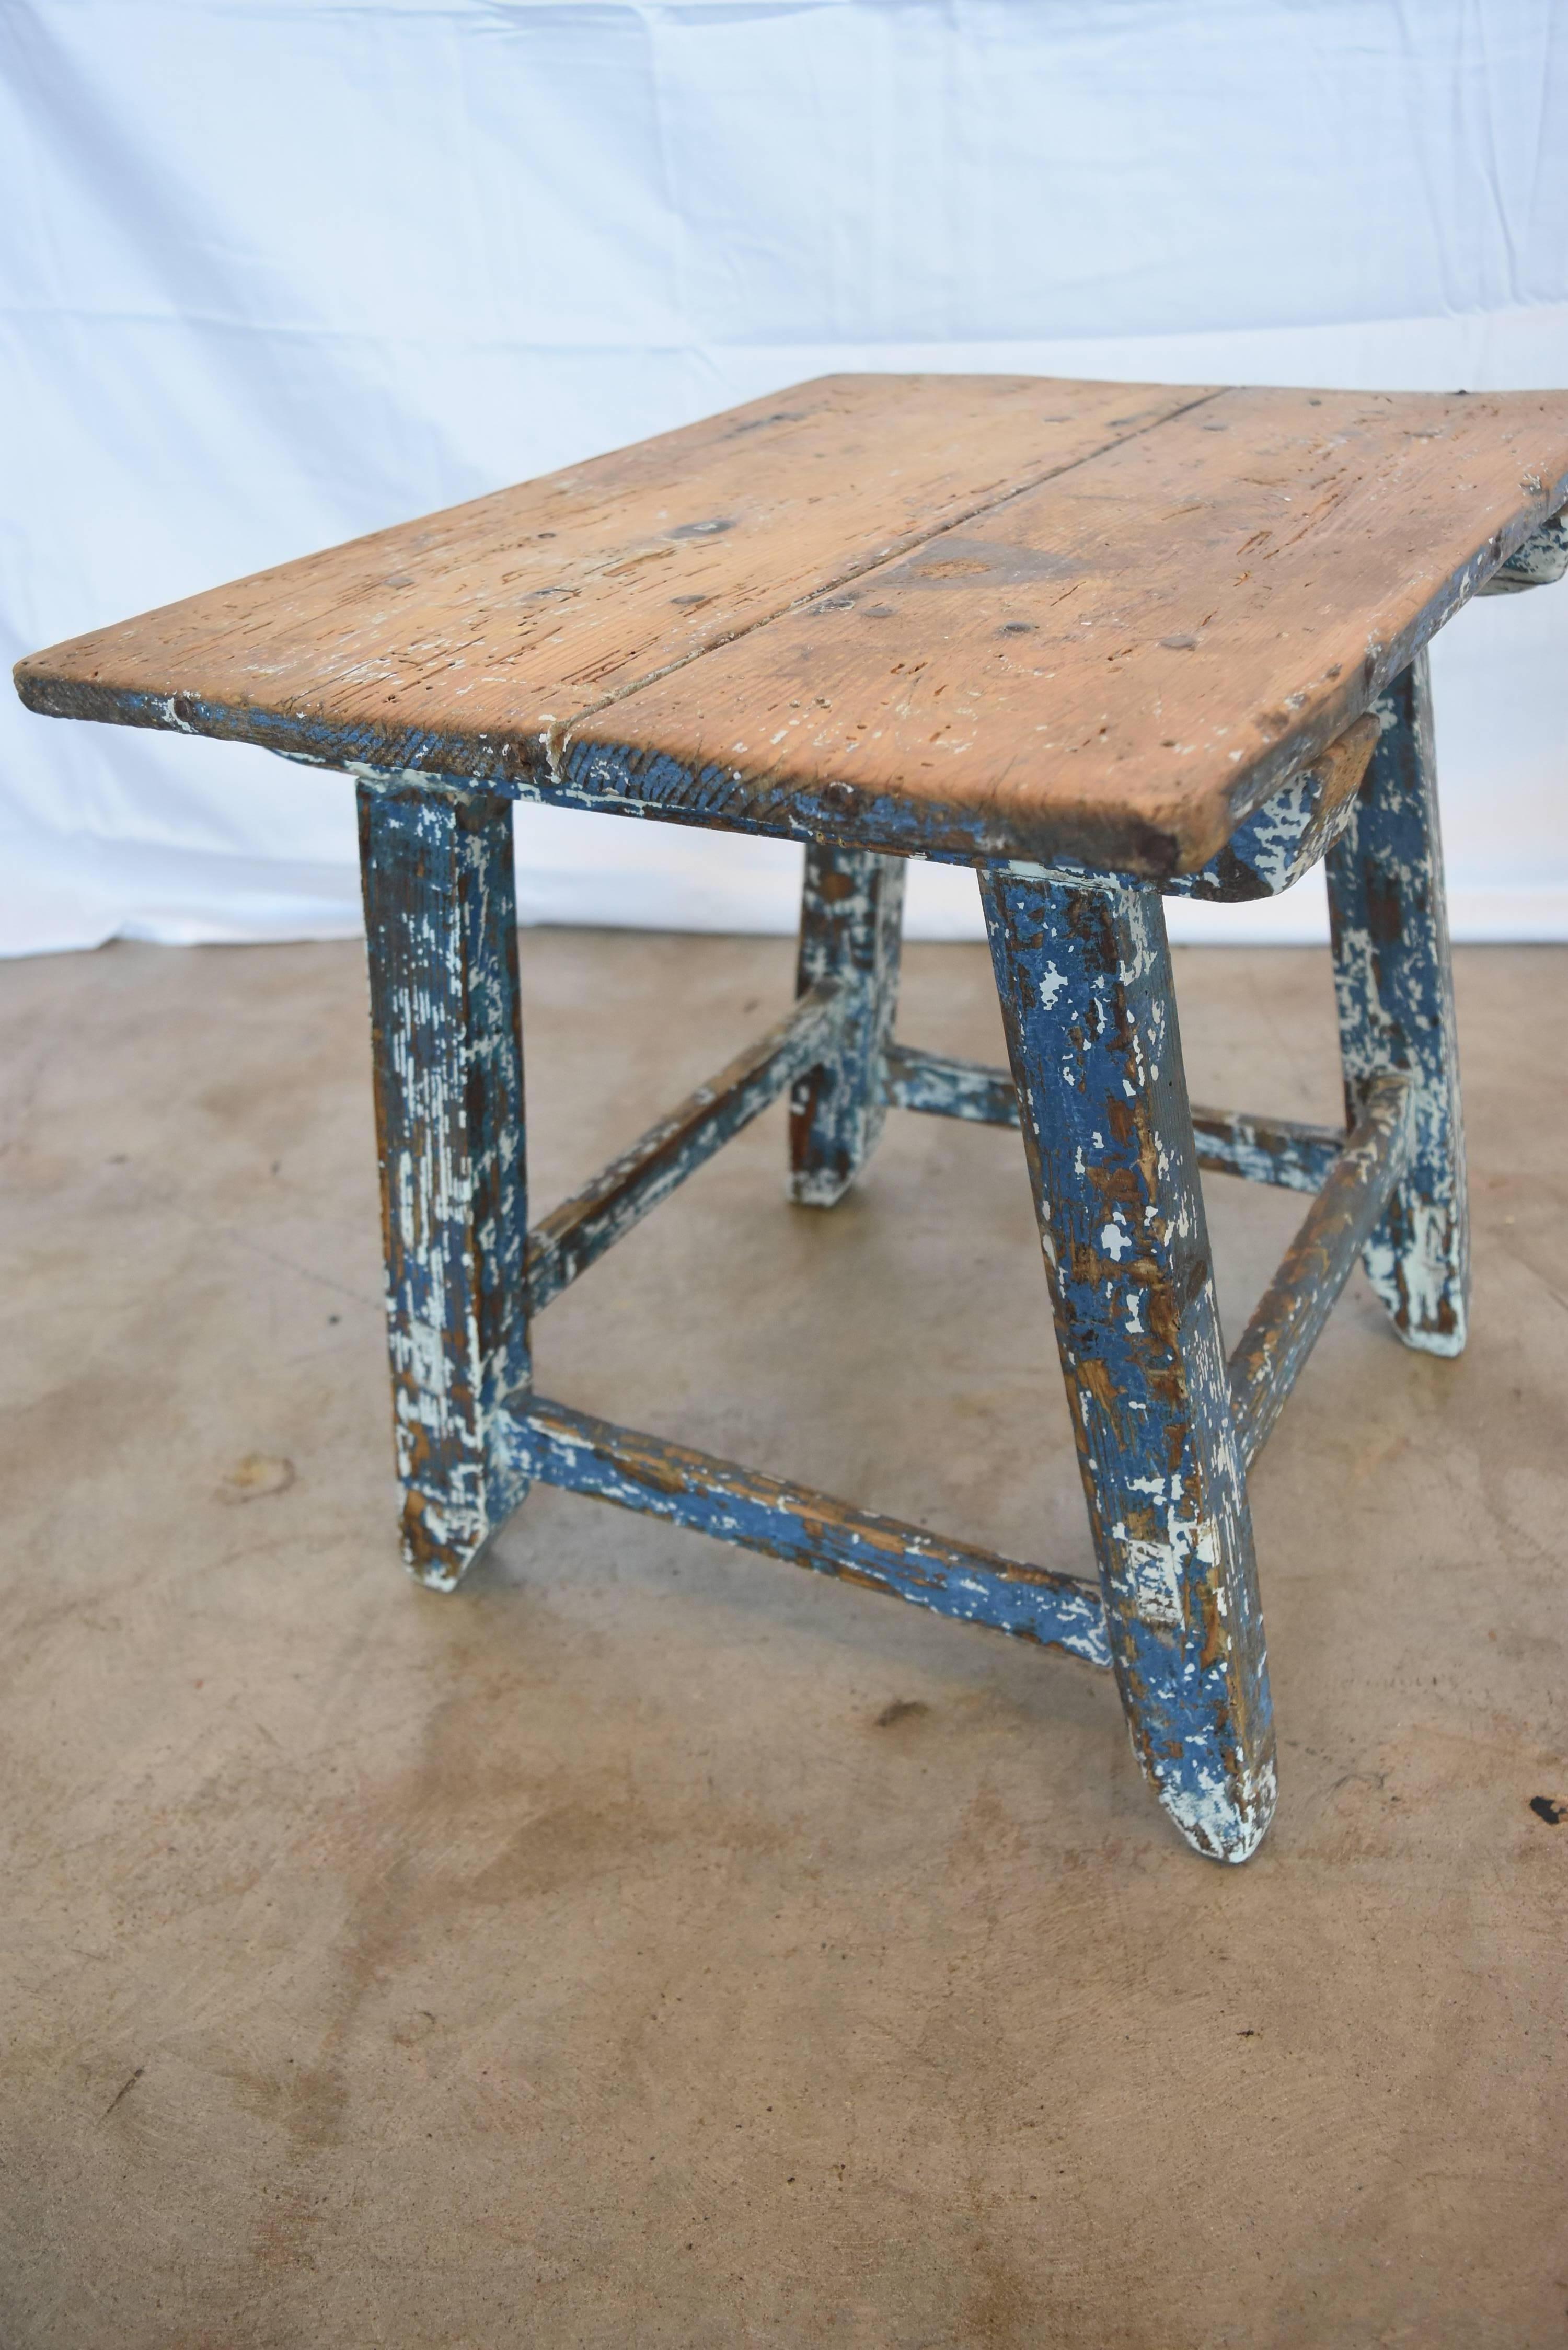 Pine Primitive Spanish Childs Table or Stool with Original Blue White Paint 4